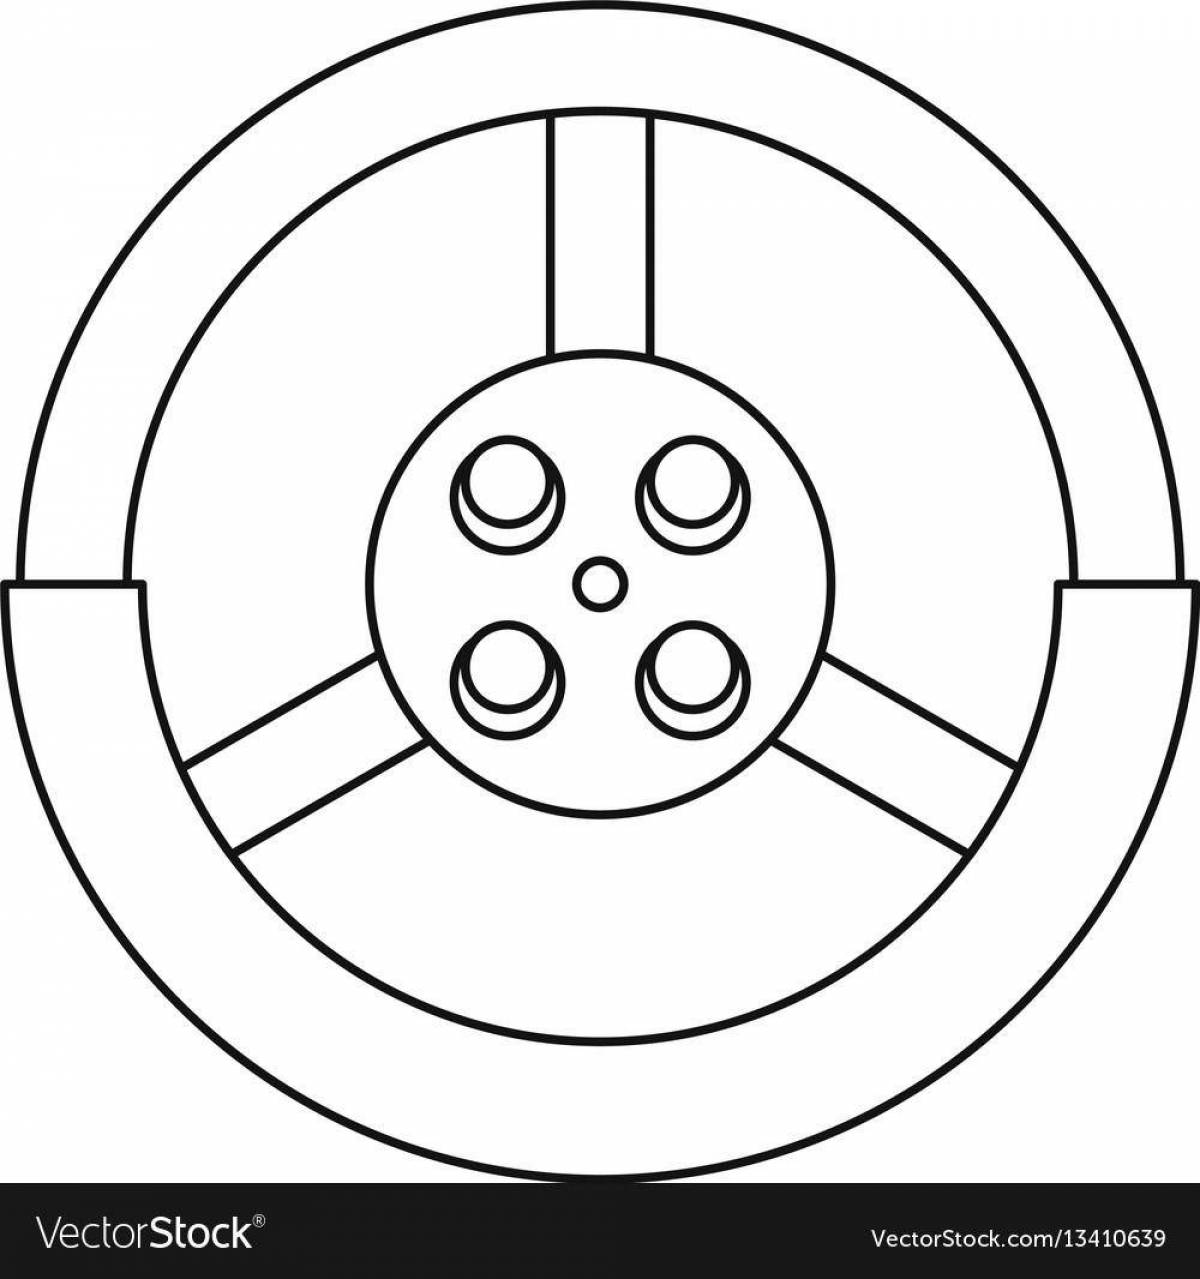 Playful steering wheel coloring page for kids